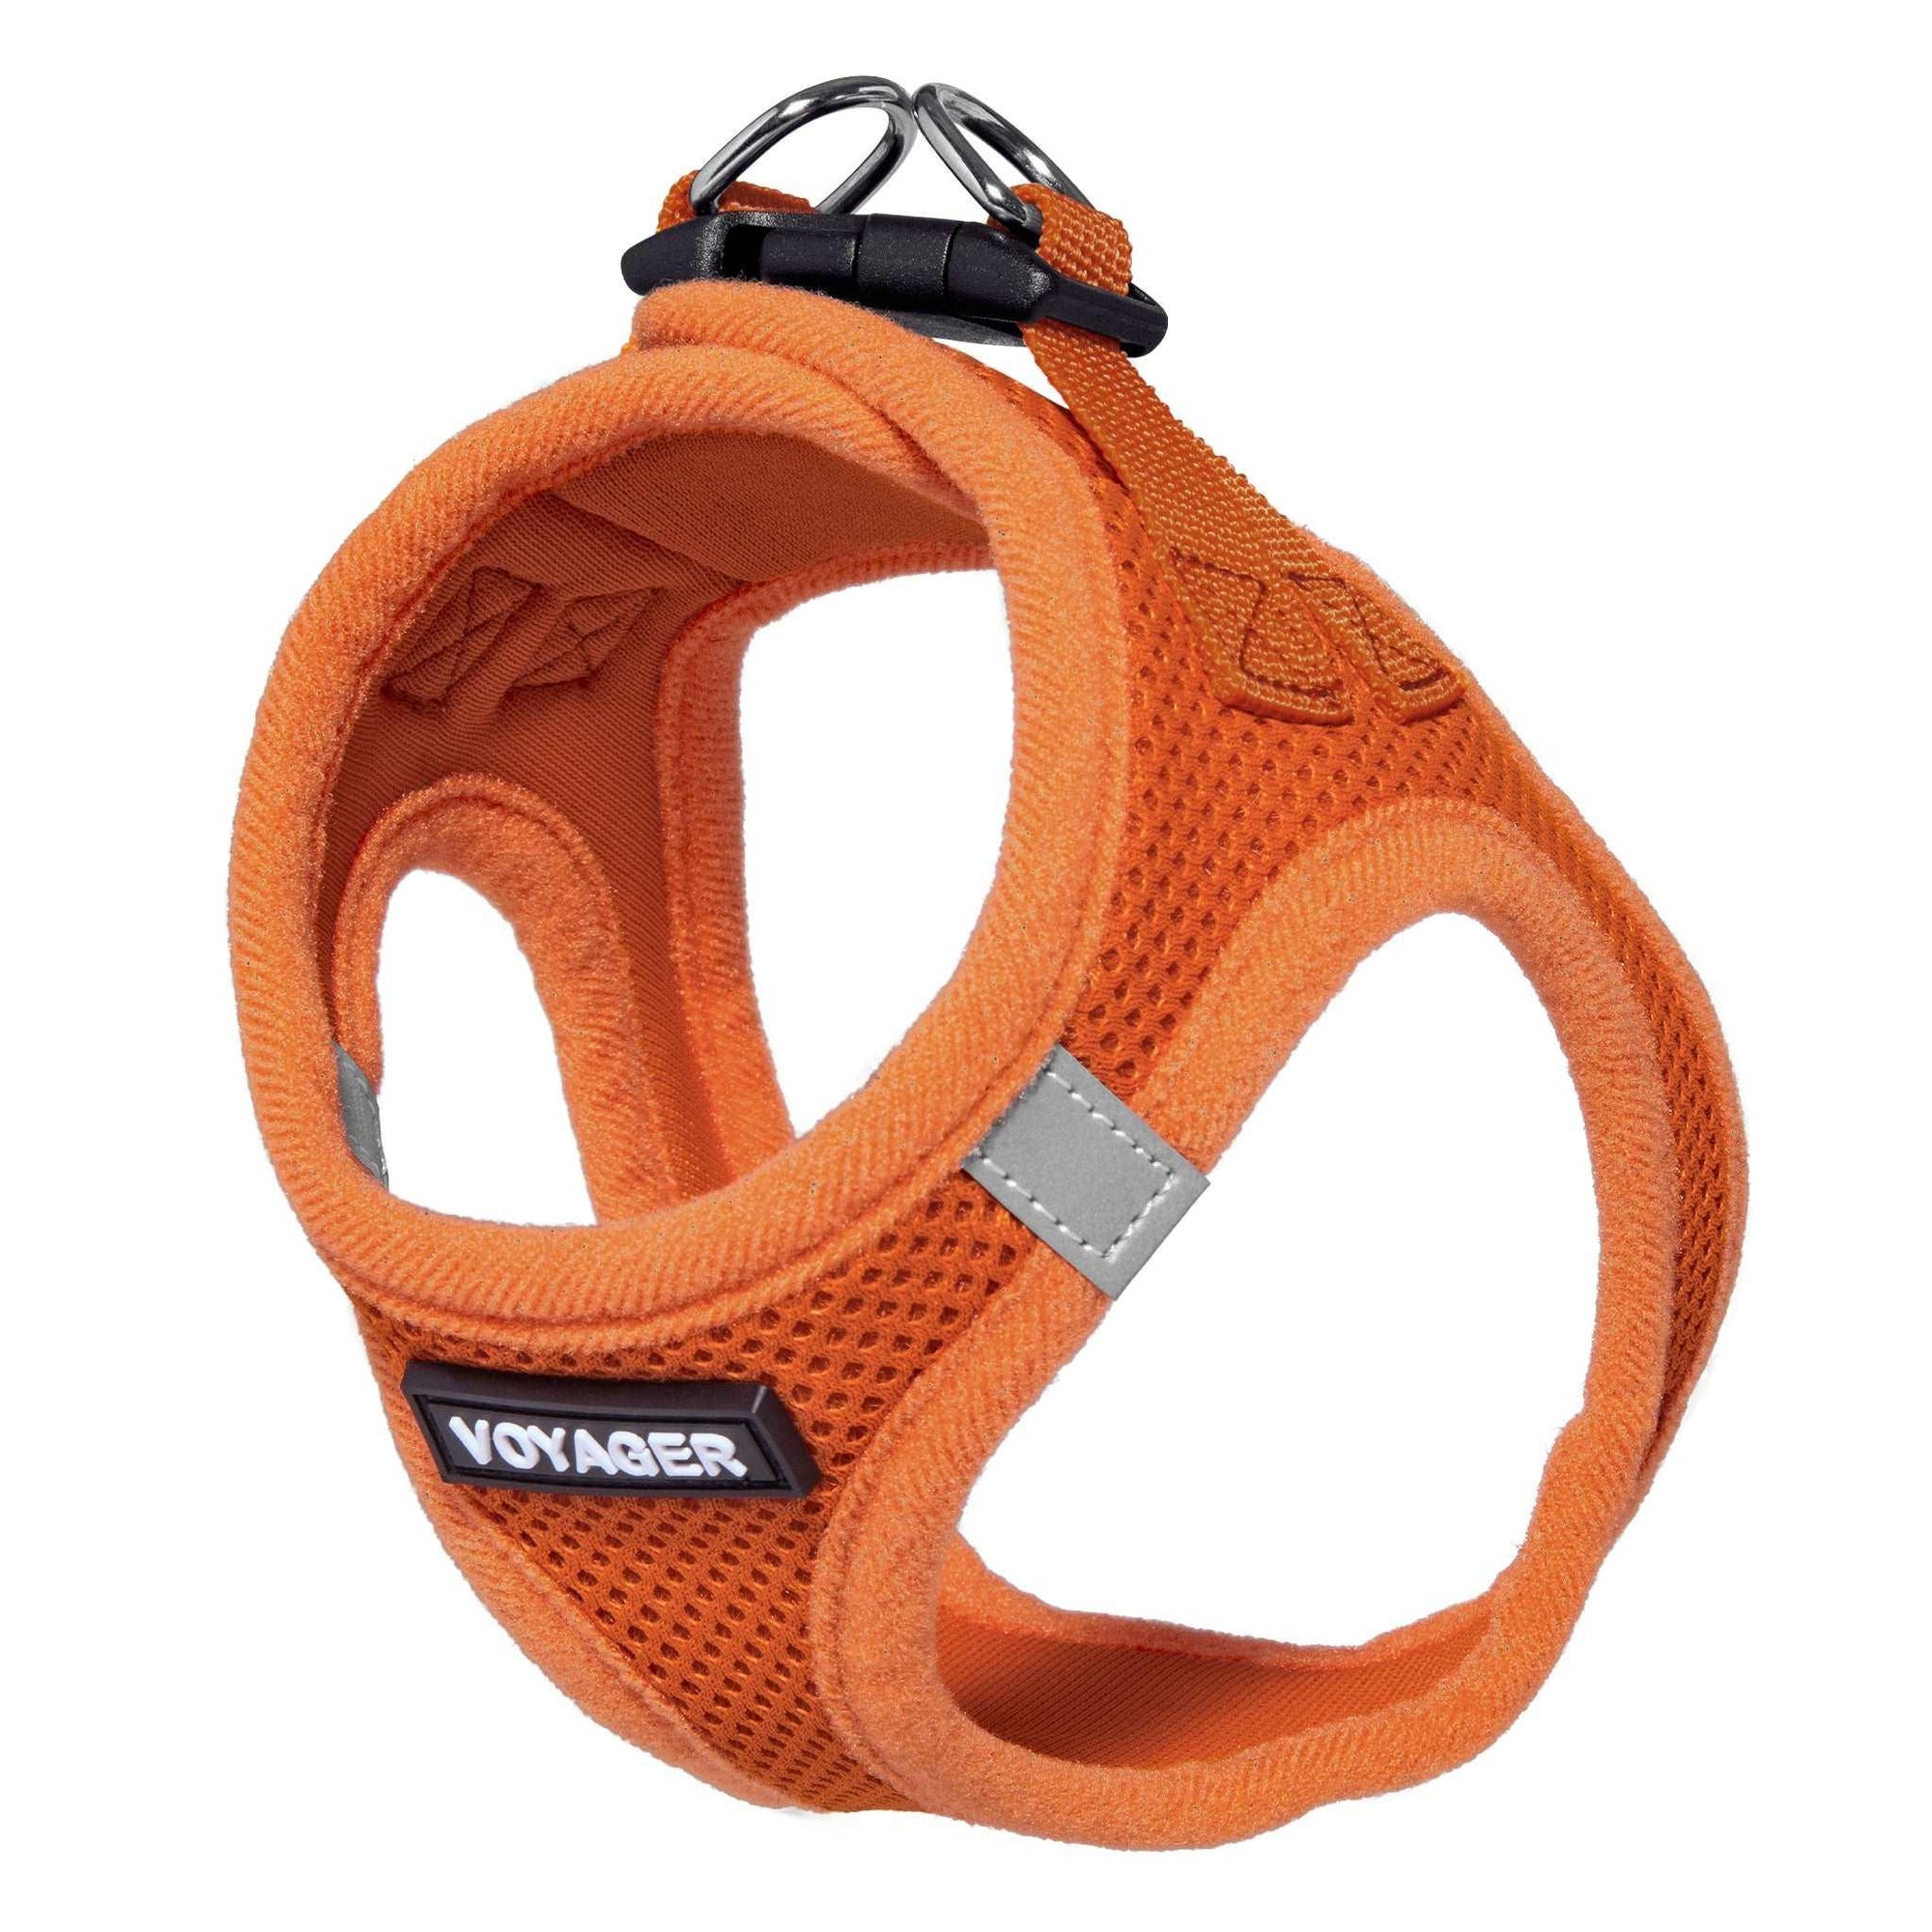 VOYAGER Step-In Air Pet Harness in Orange with Matching Trim and Webbing - Expanded